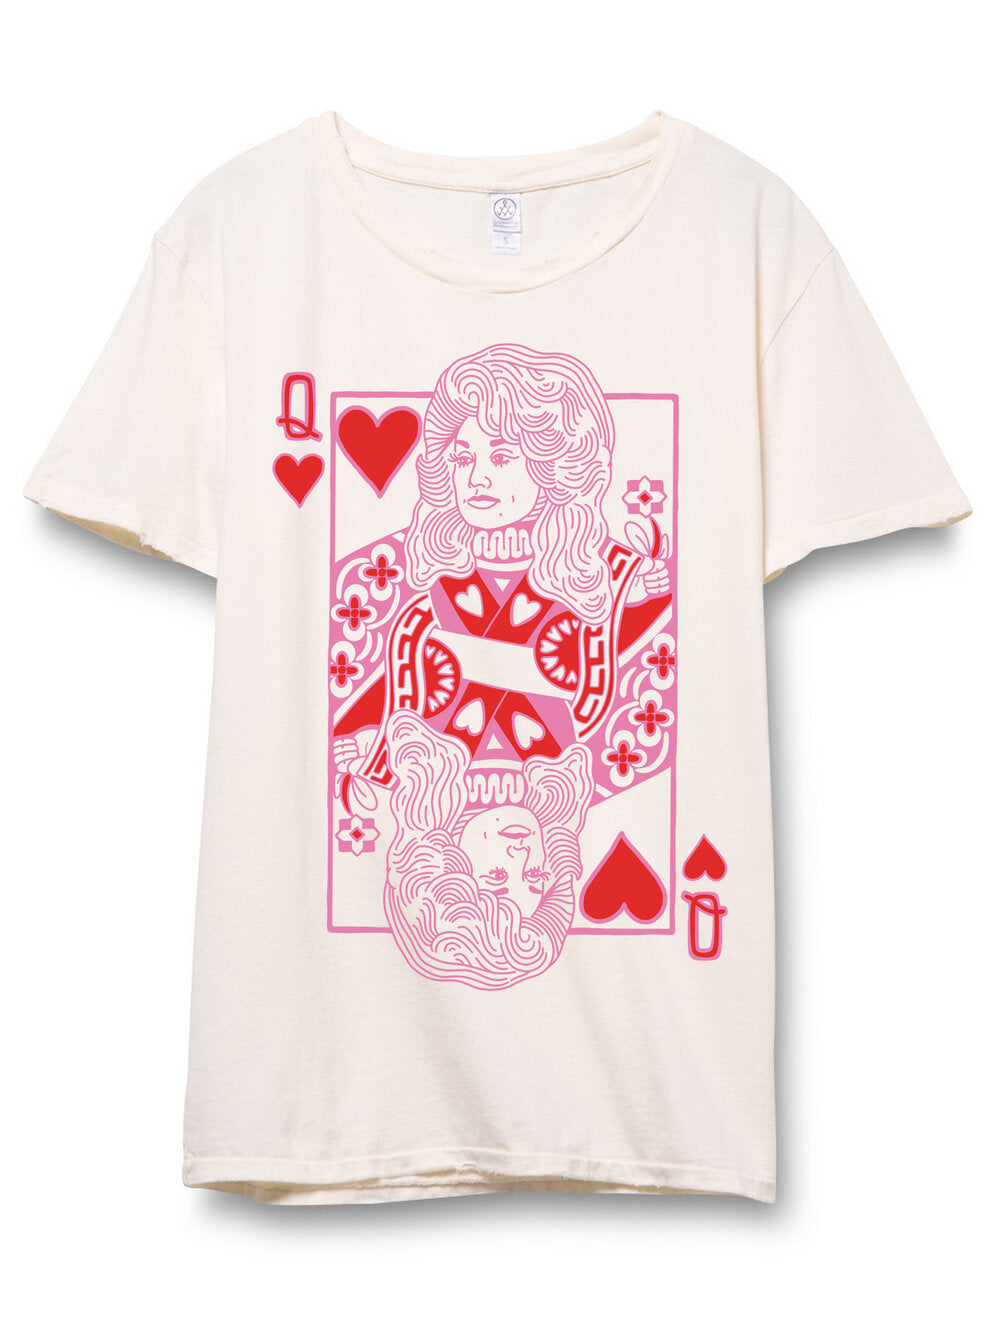 Black Milk Clothing - Queen of hearts? More like add to cart